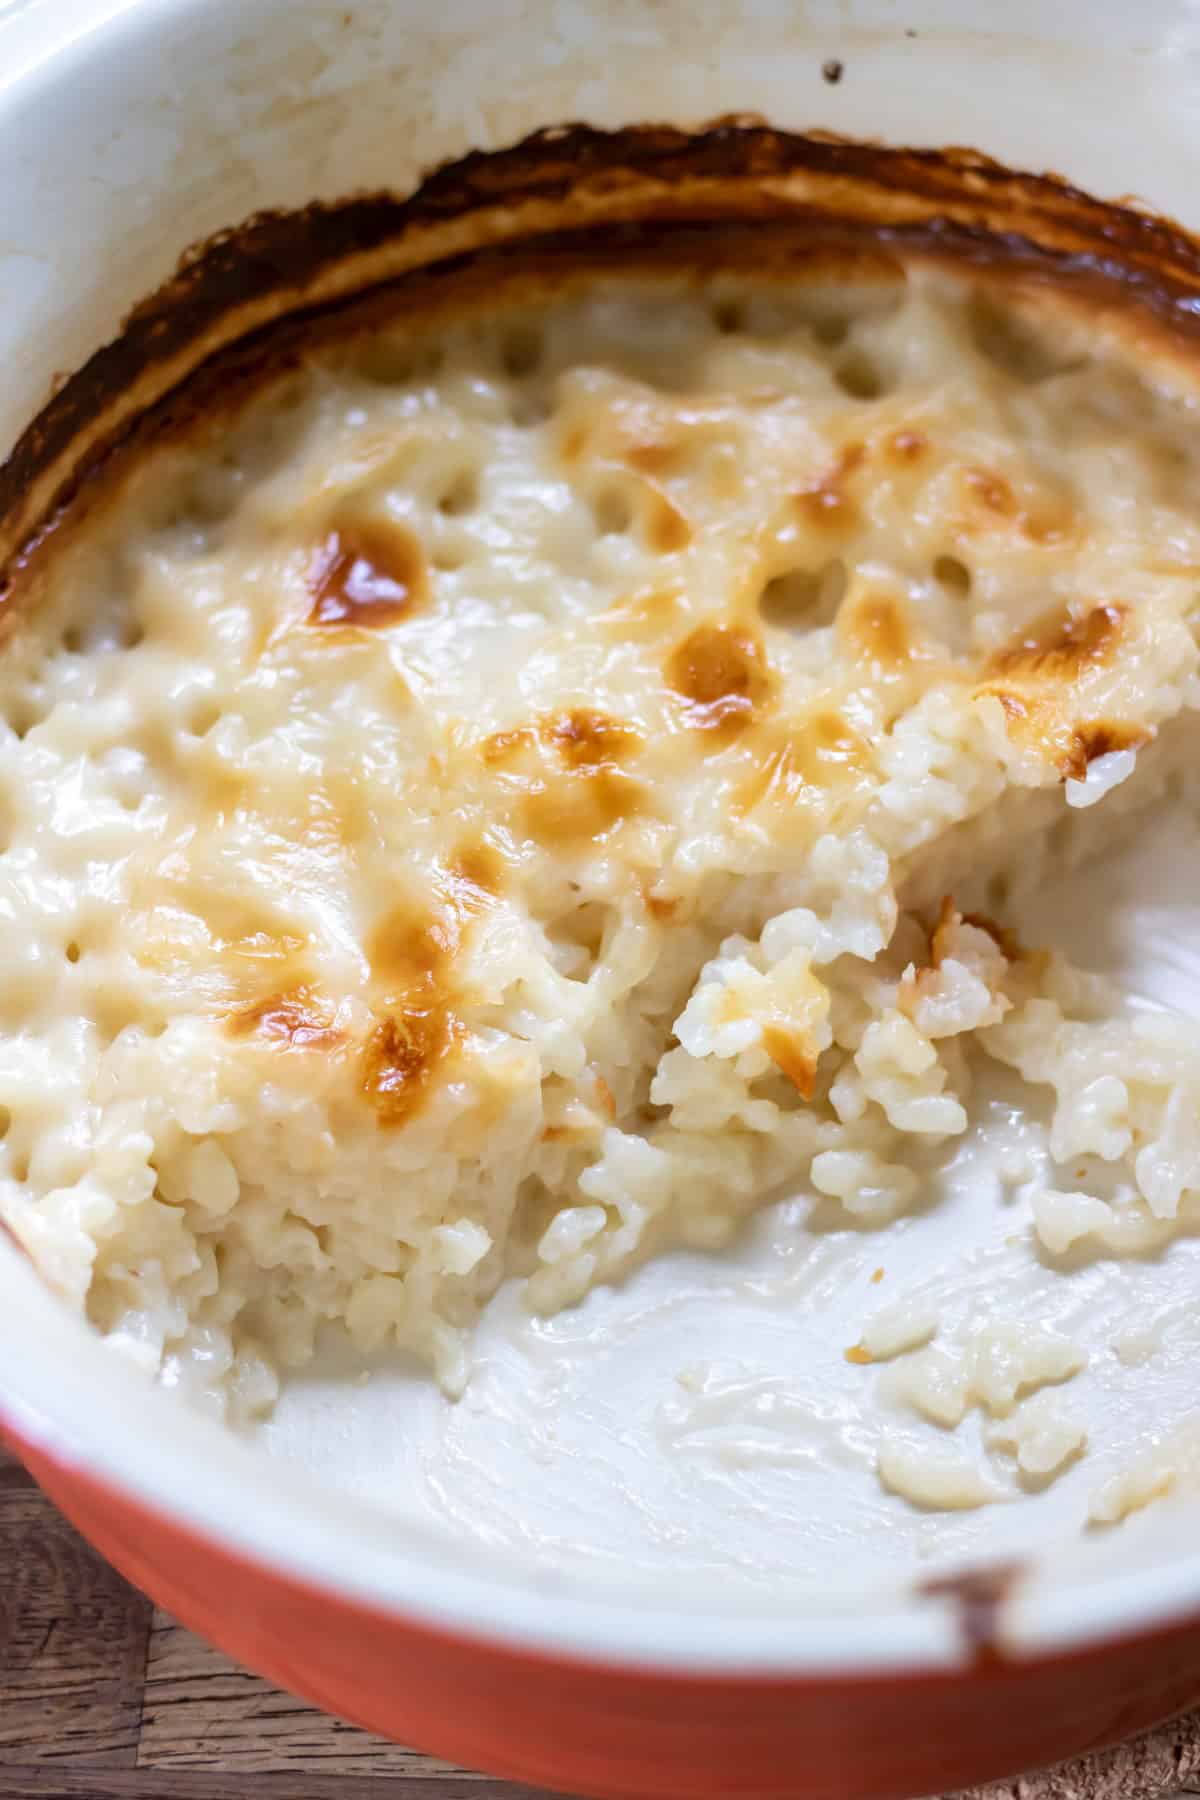 Dish of baked vegan rice pudding with some out of the dish.